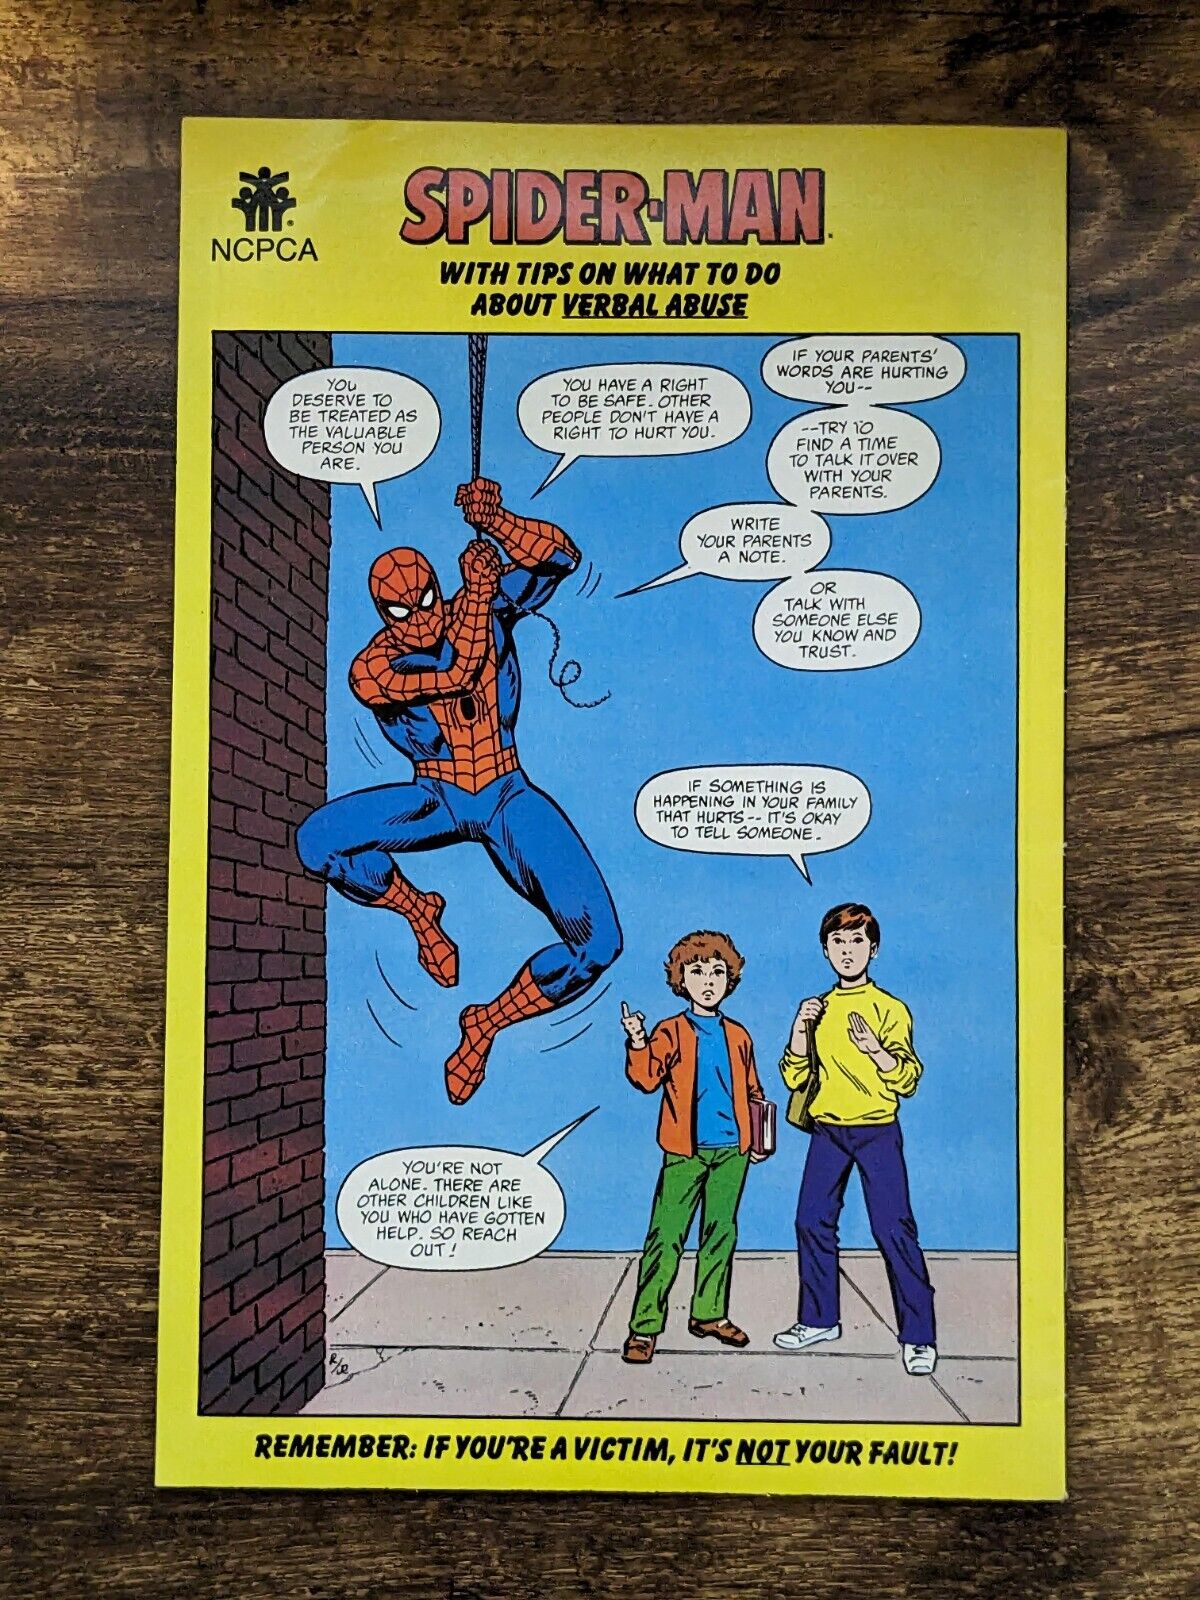 SPIDER-MAN SPECIAL EDITION 1987 Comic Book - Vintage Exclusive Against Child Abuse - Asylum Books